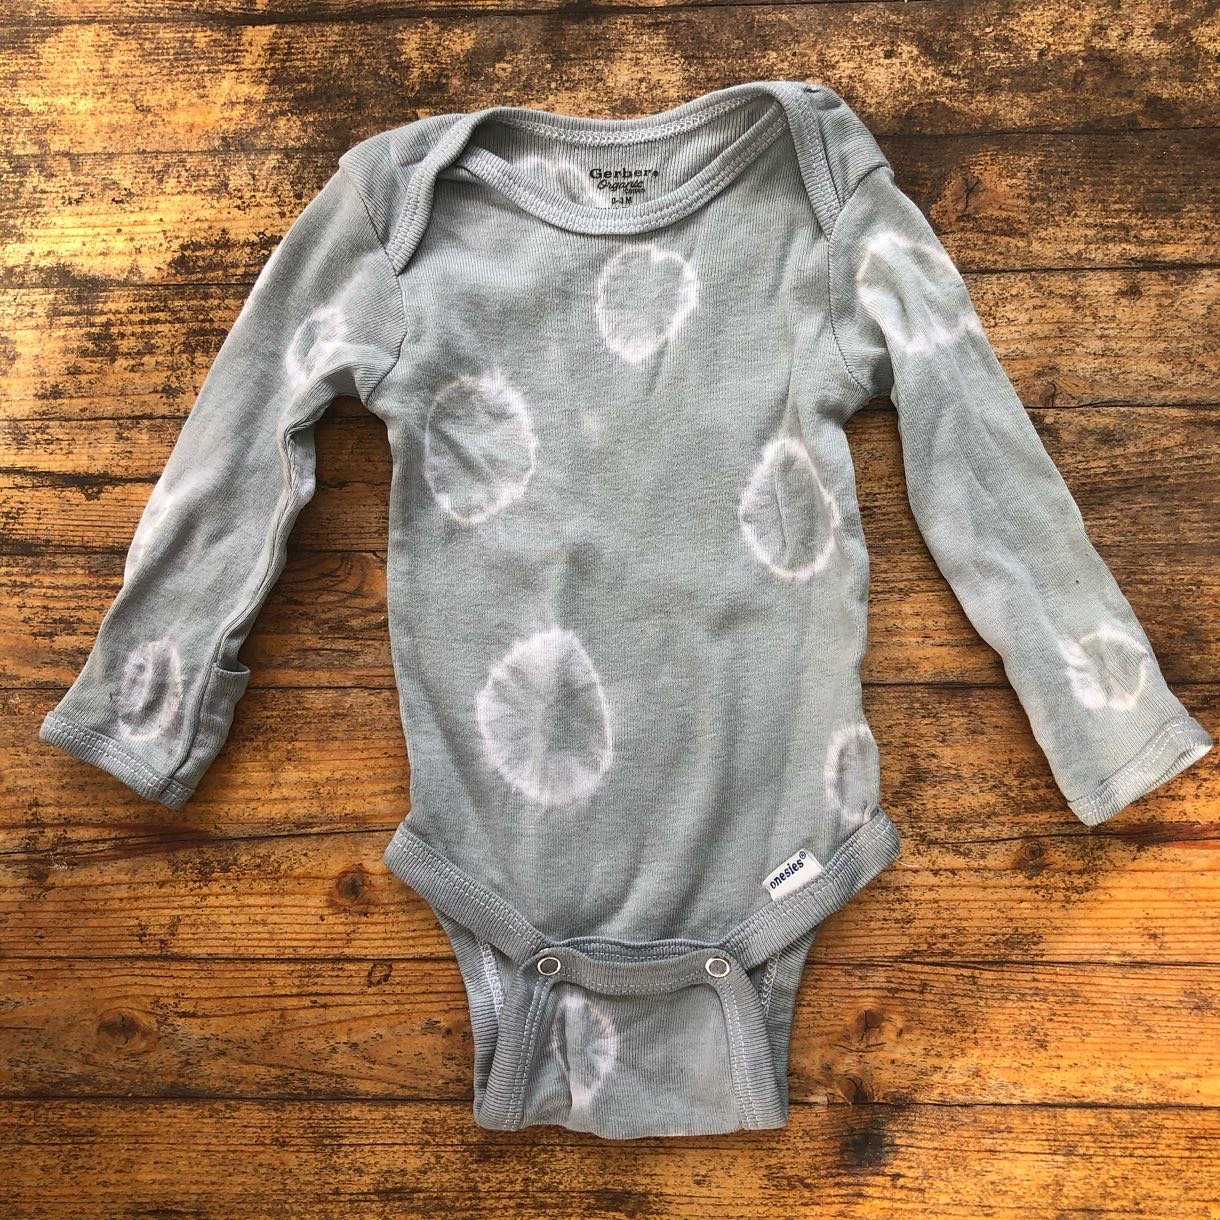 Onesie dyed with Hollyhocks